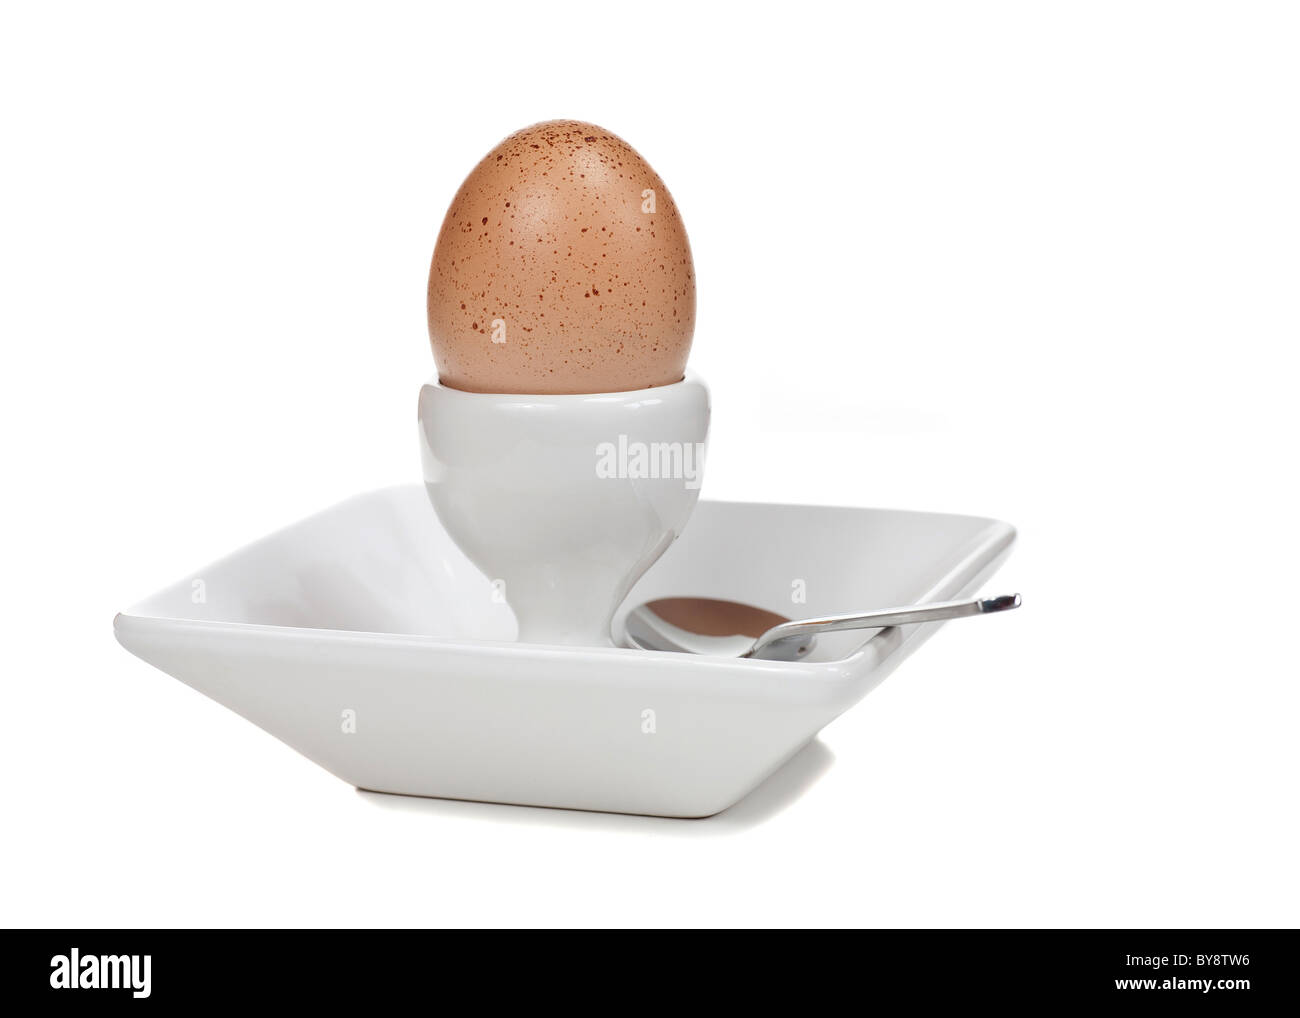 A free-range boiled egg with spoon. White background. Stock Photo